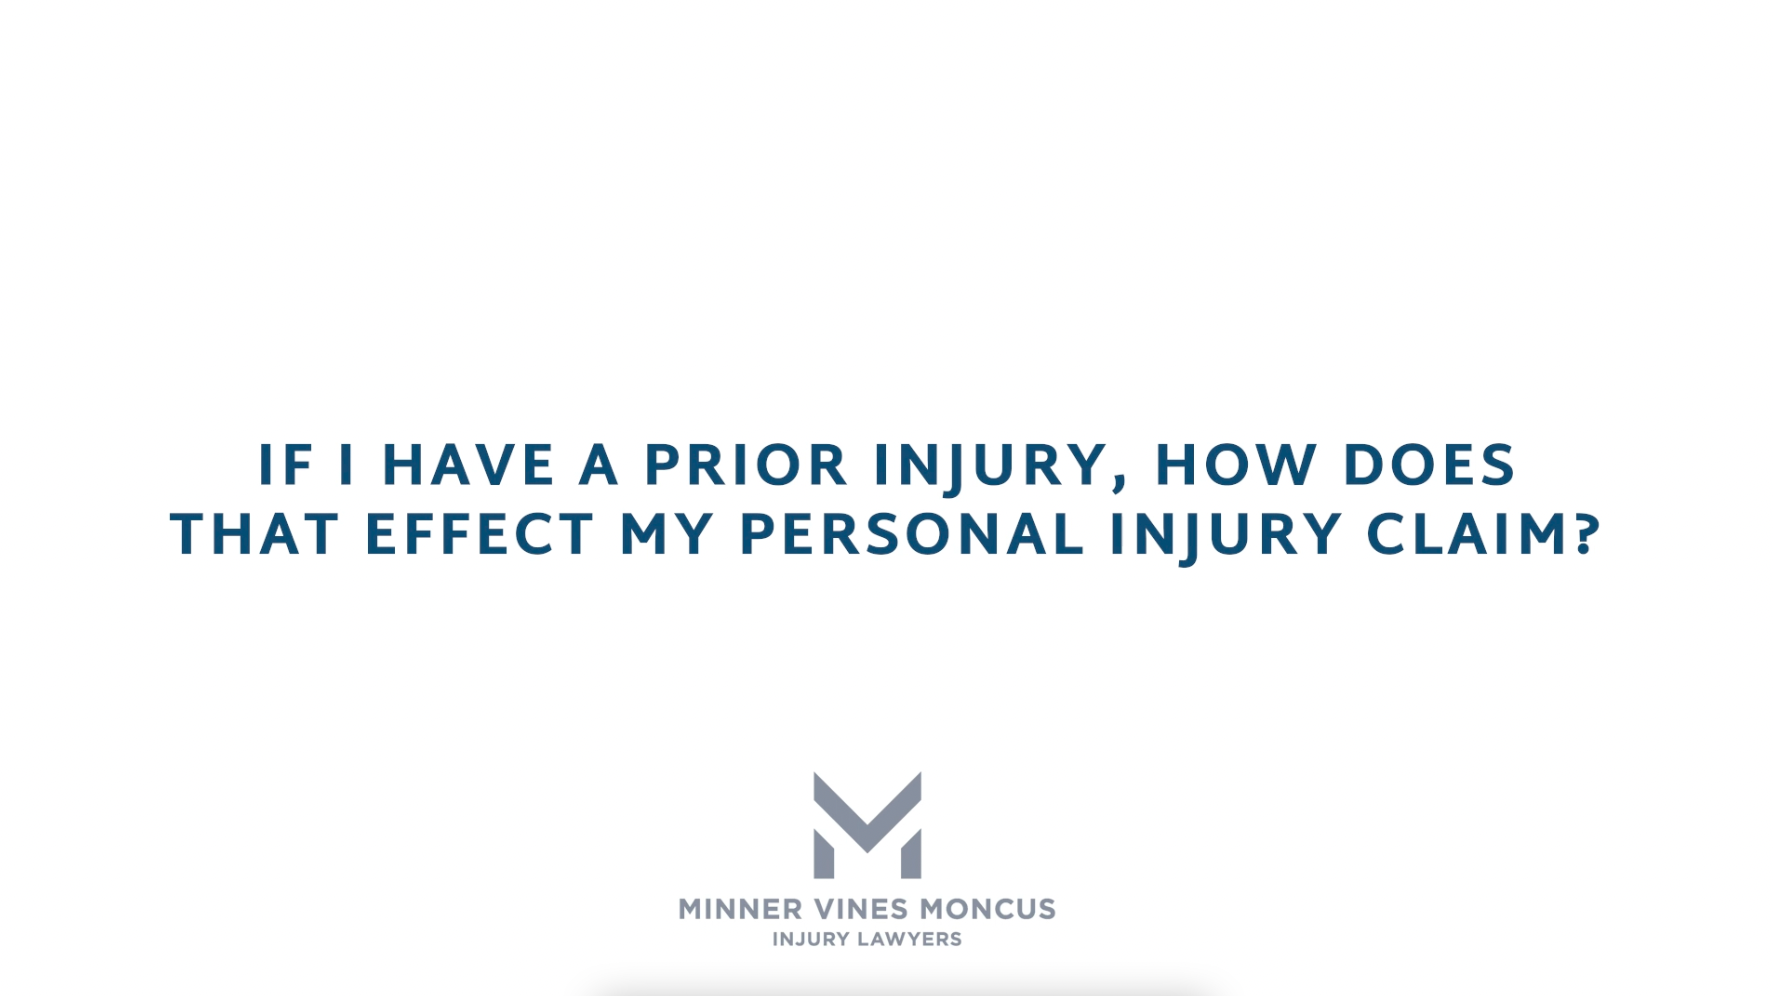 If I have a prior injury, how does that effect my personal injury claim?